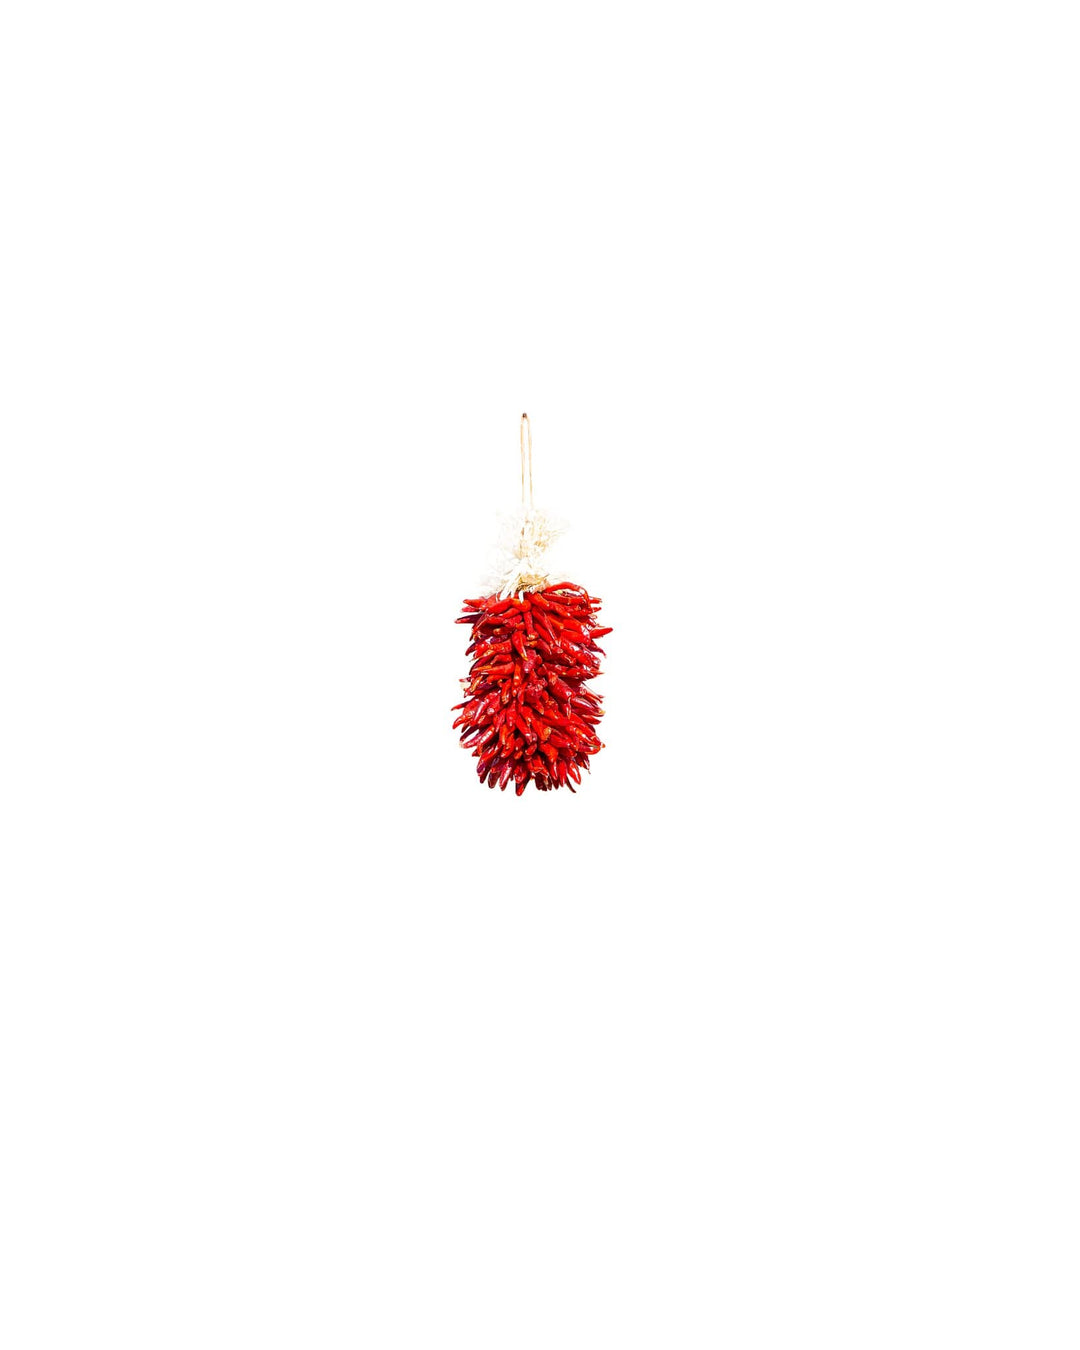 A vibrant Chile Pequin Ristras ornament hanging against a plain white background, evoking the New Mexican charm.